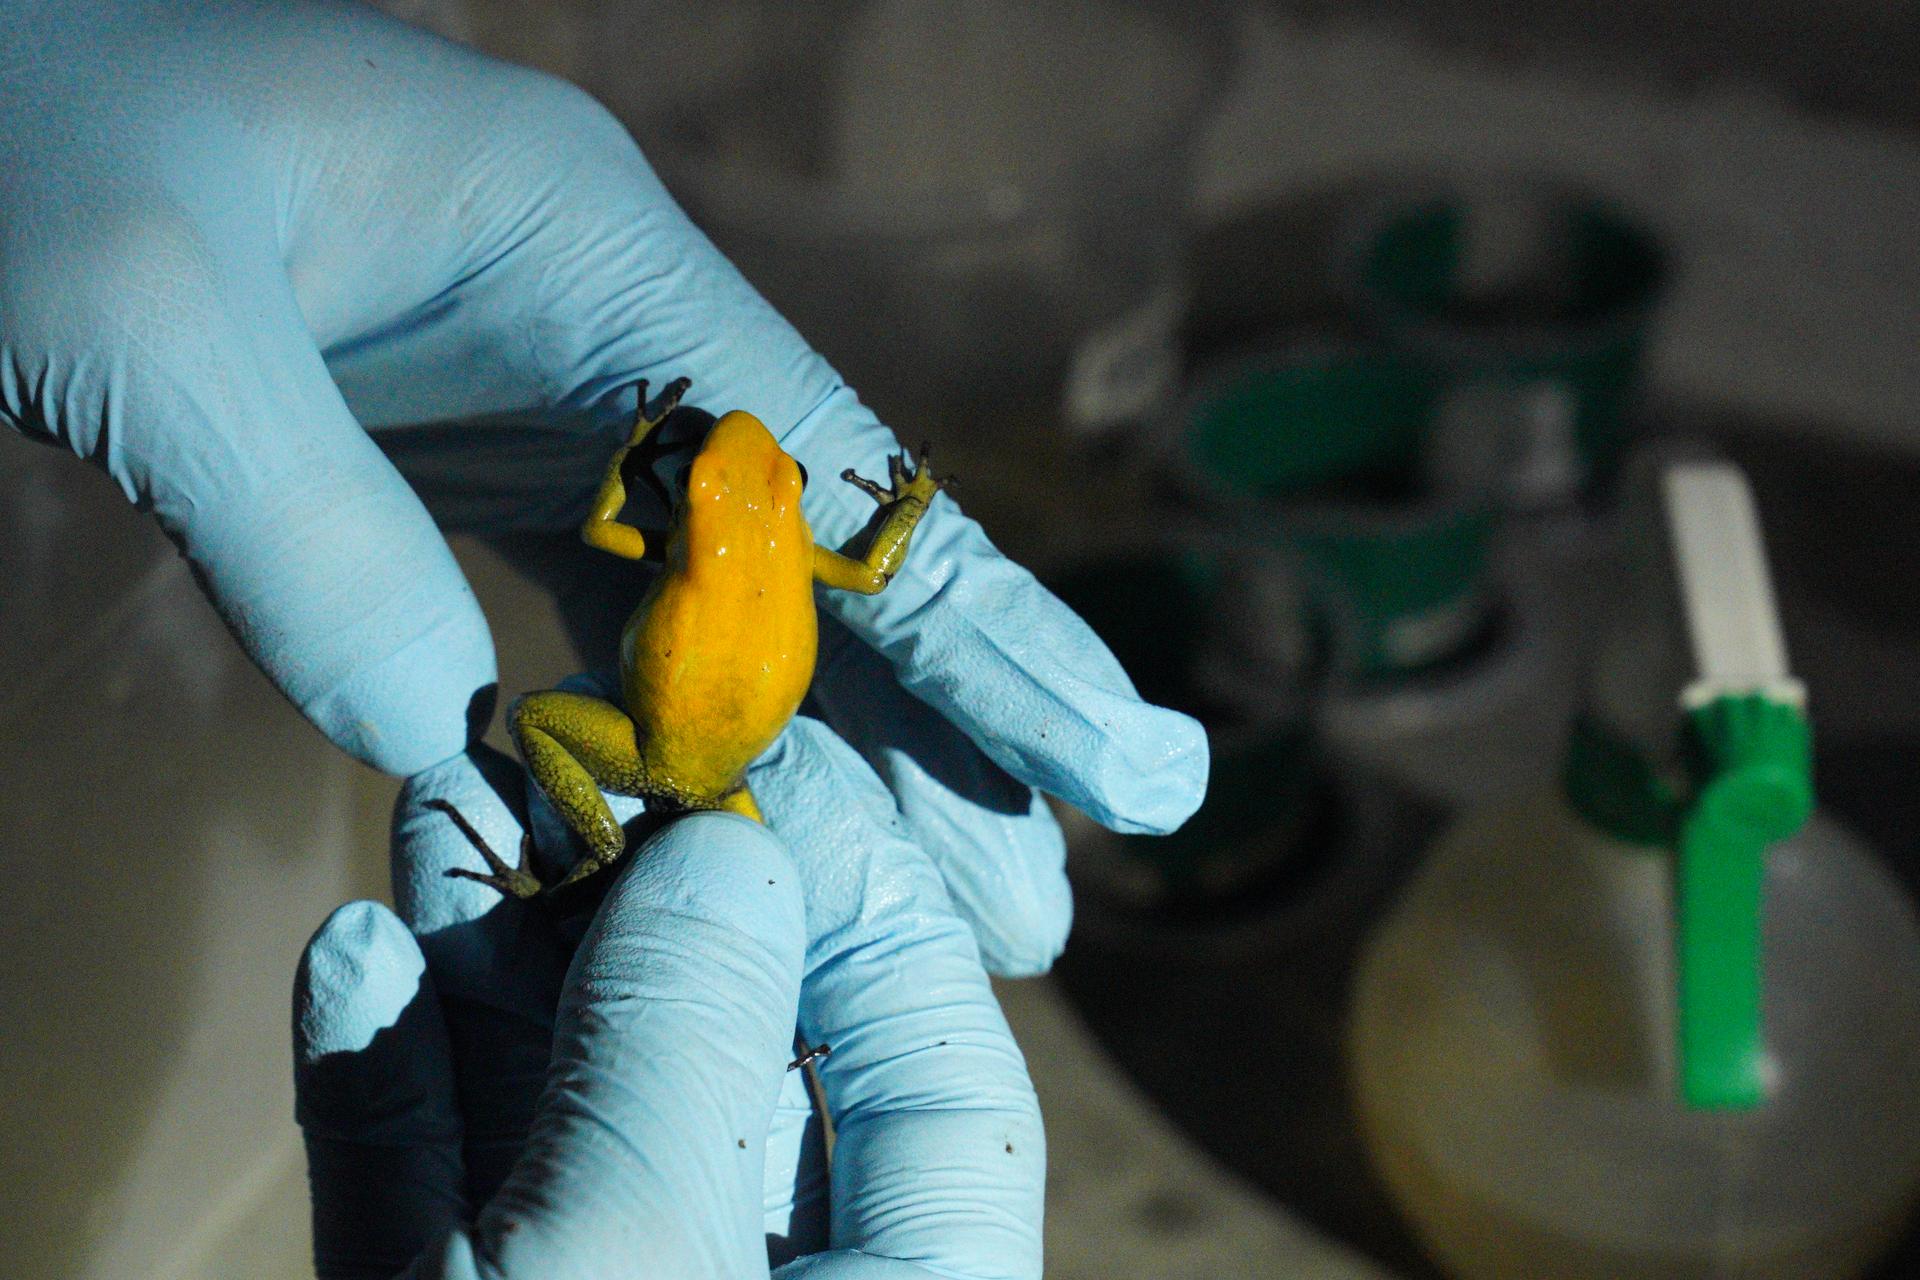 Ivan Ramos inspects a Phyllobates bicolor that is about to be sent to a collector in Europe.